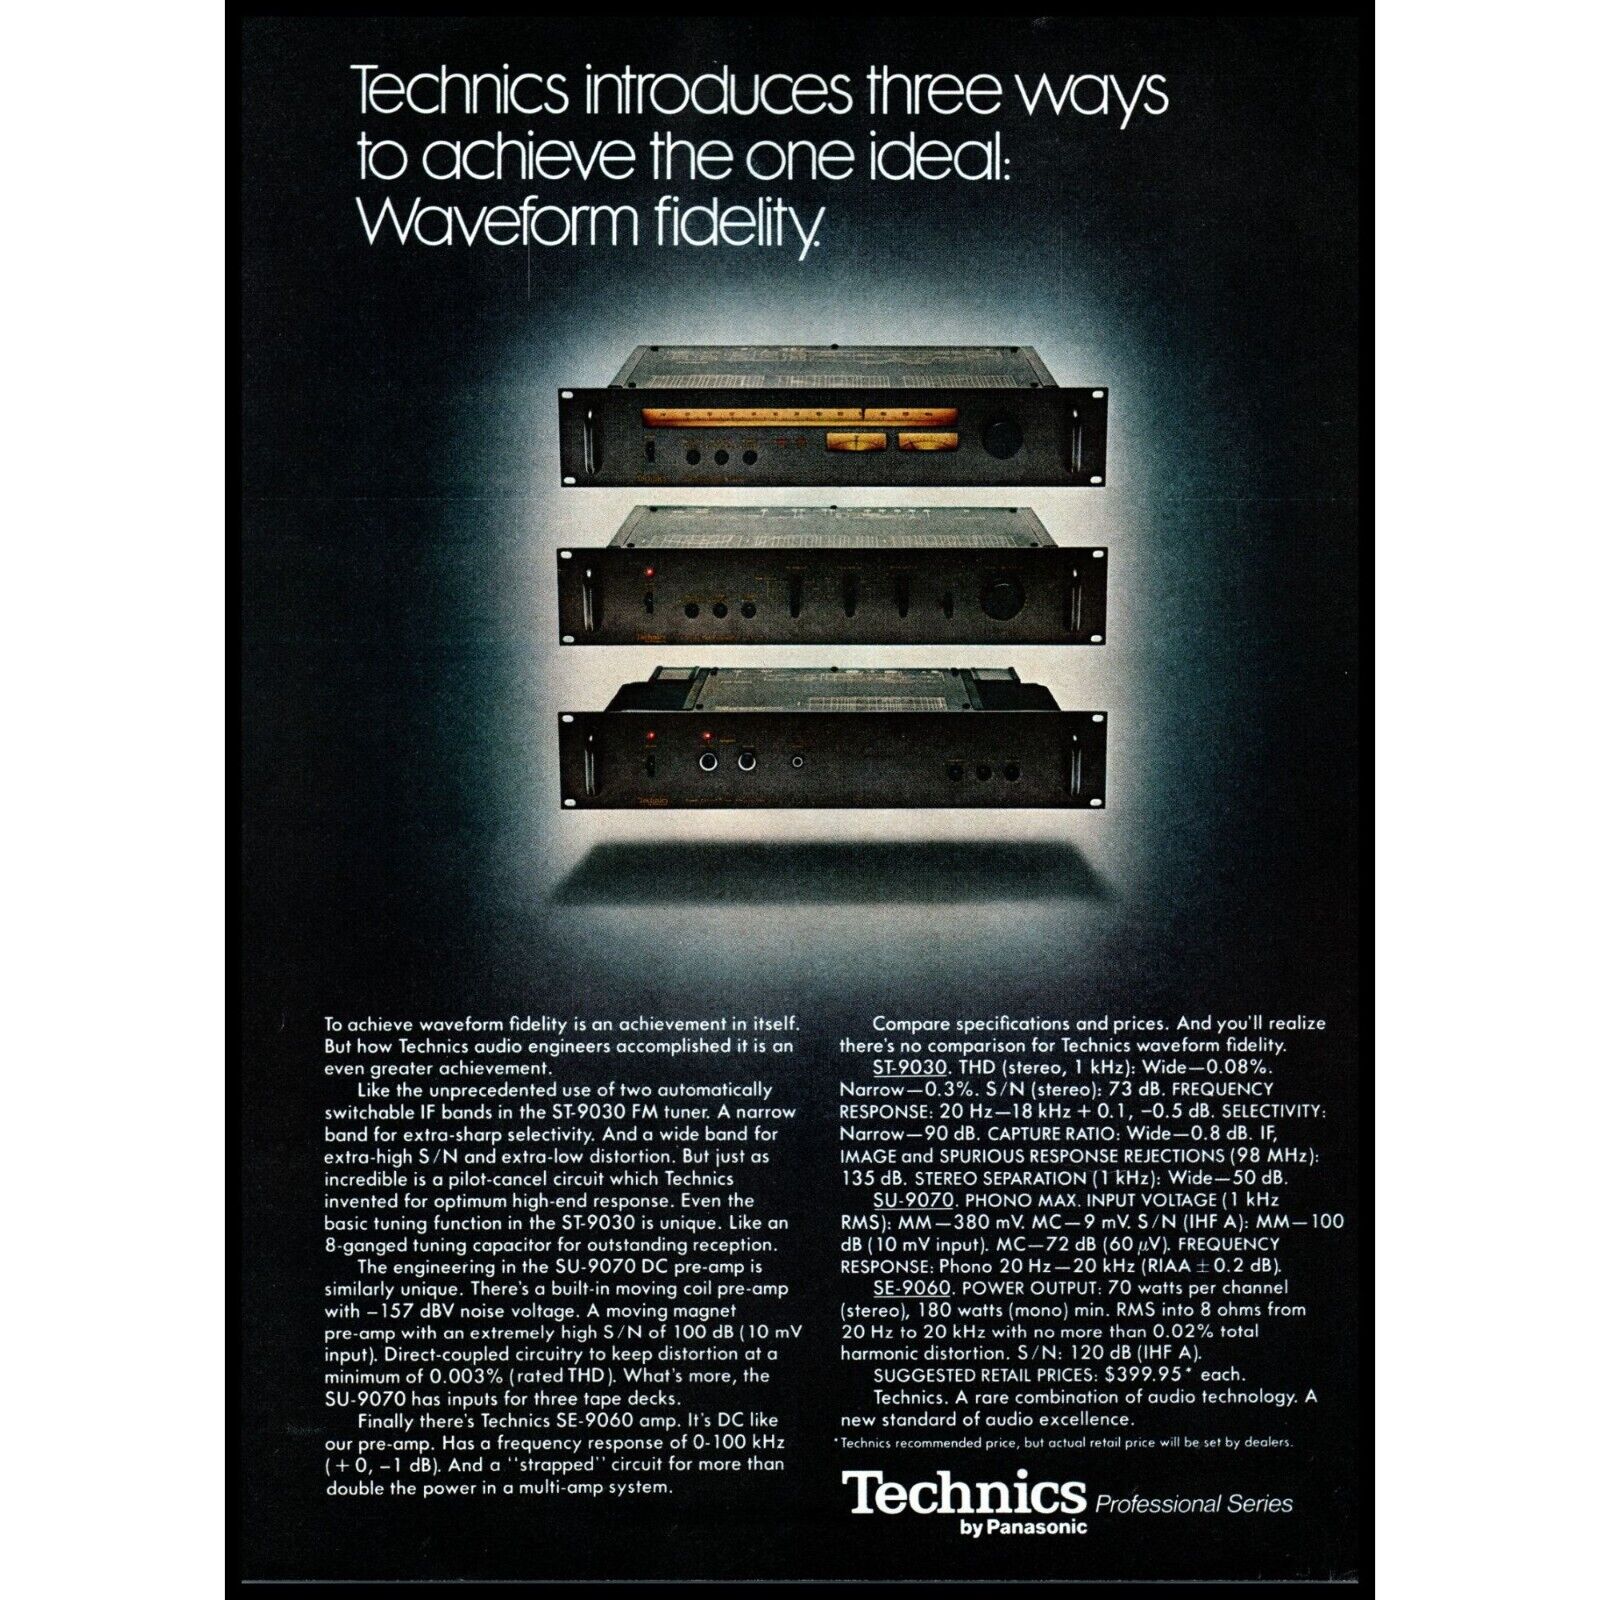 1978 Technics Professional Series Stereo Components Vintage Print Ad Wall Art